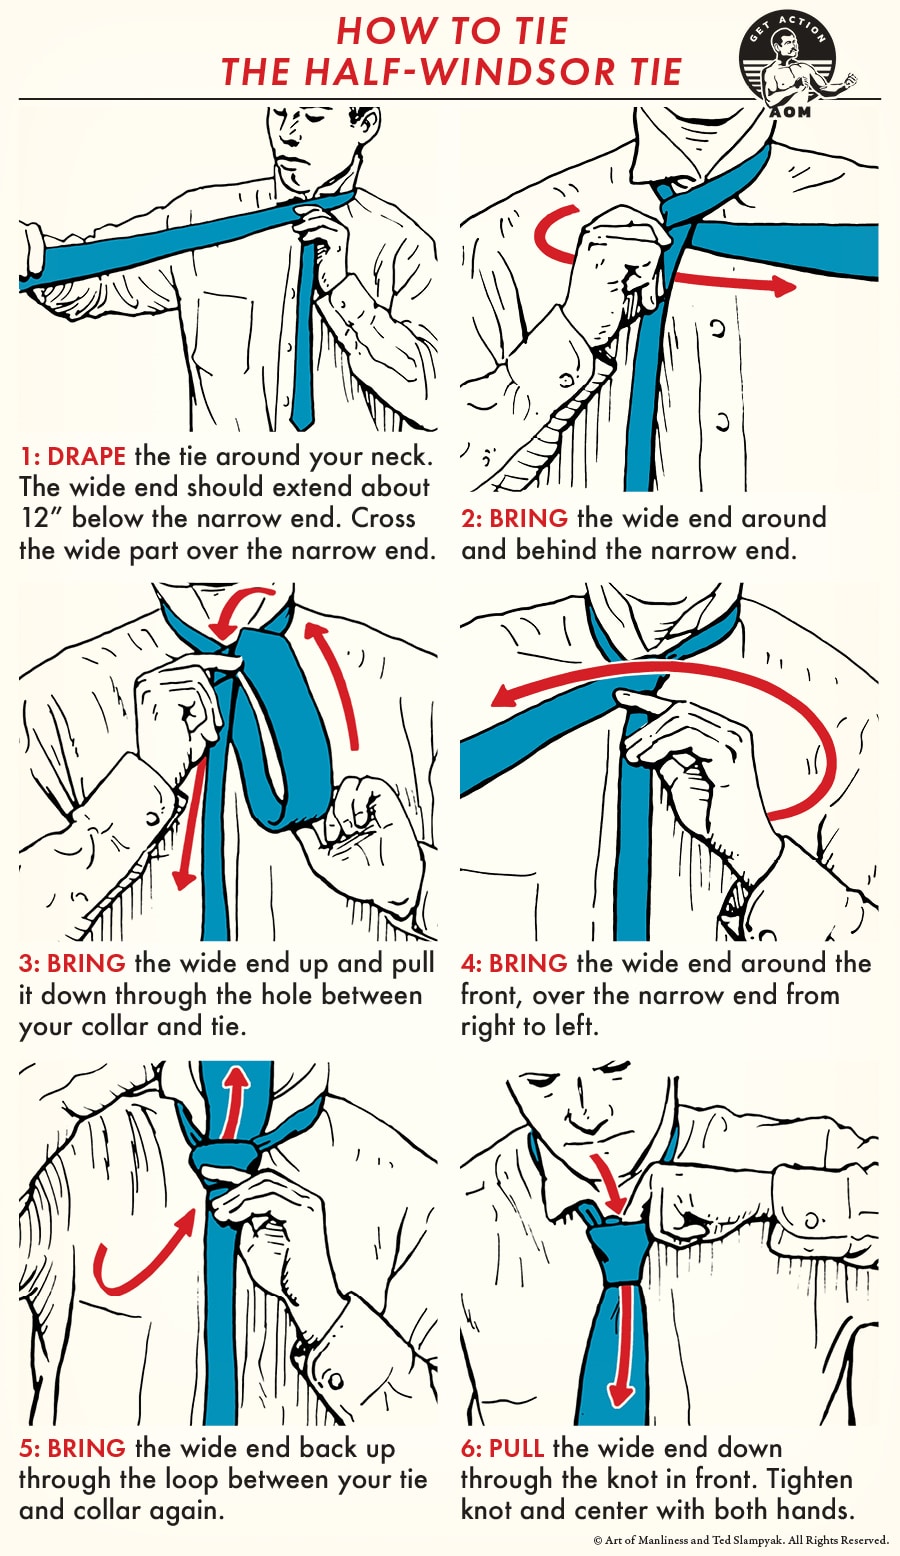 How to Tie a Half-Windsor Knot: An Illustrated Guide